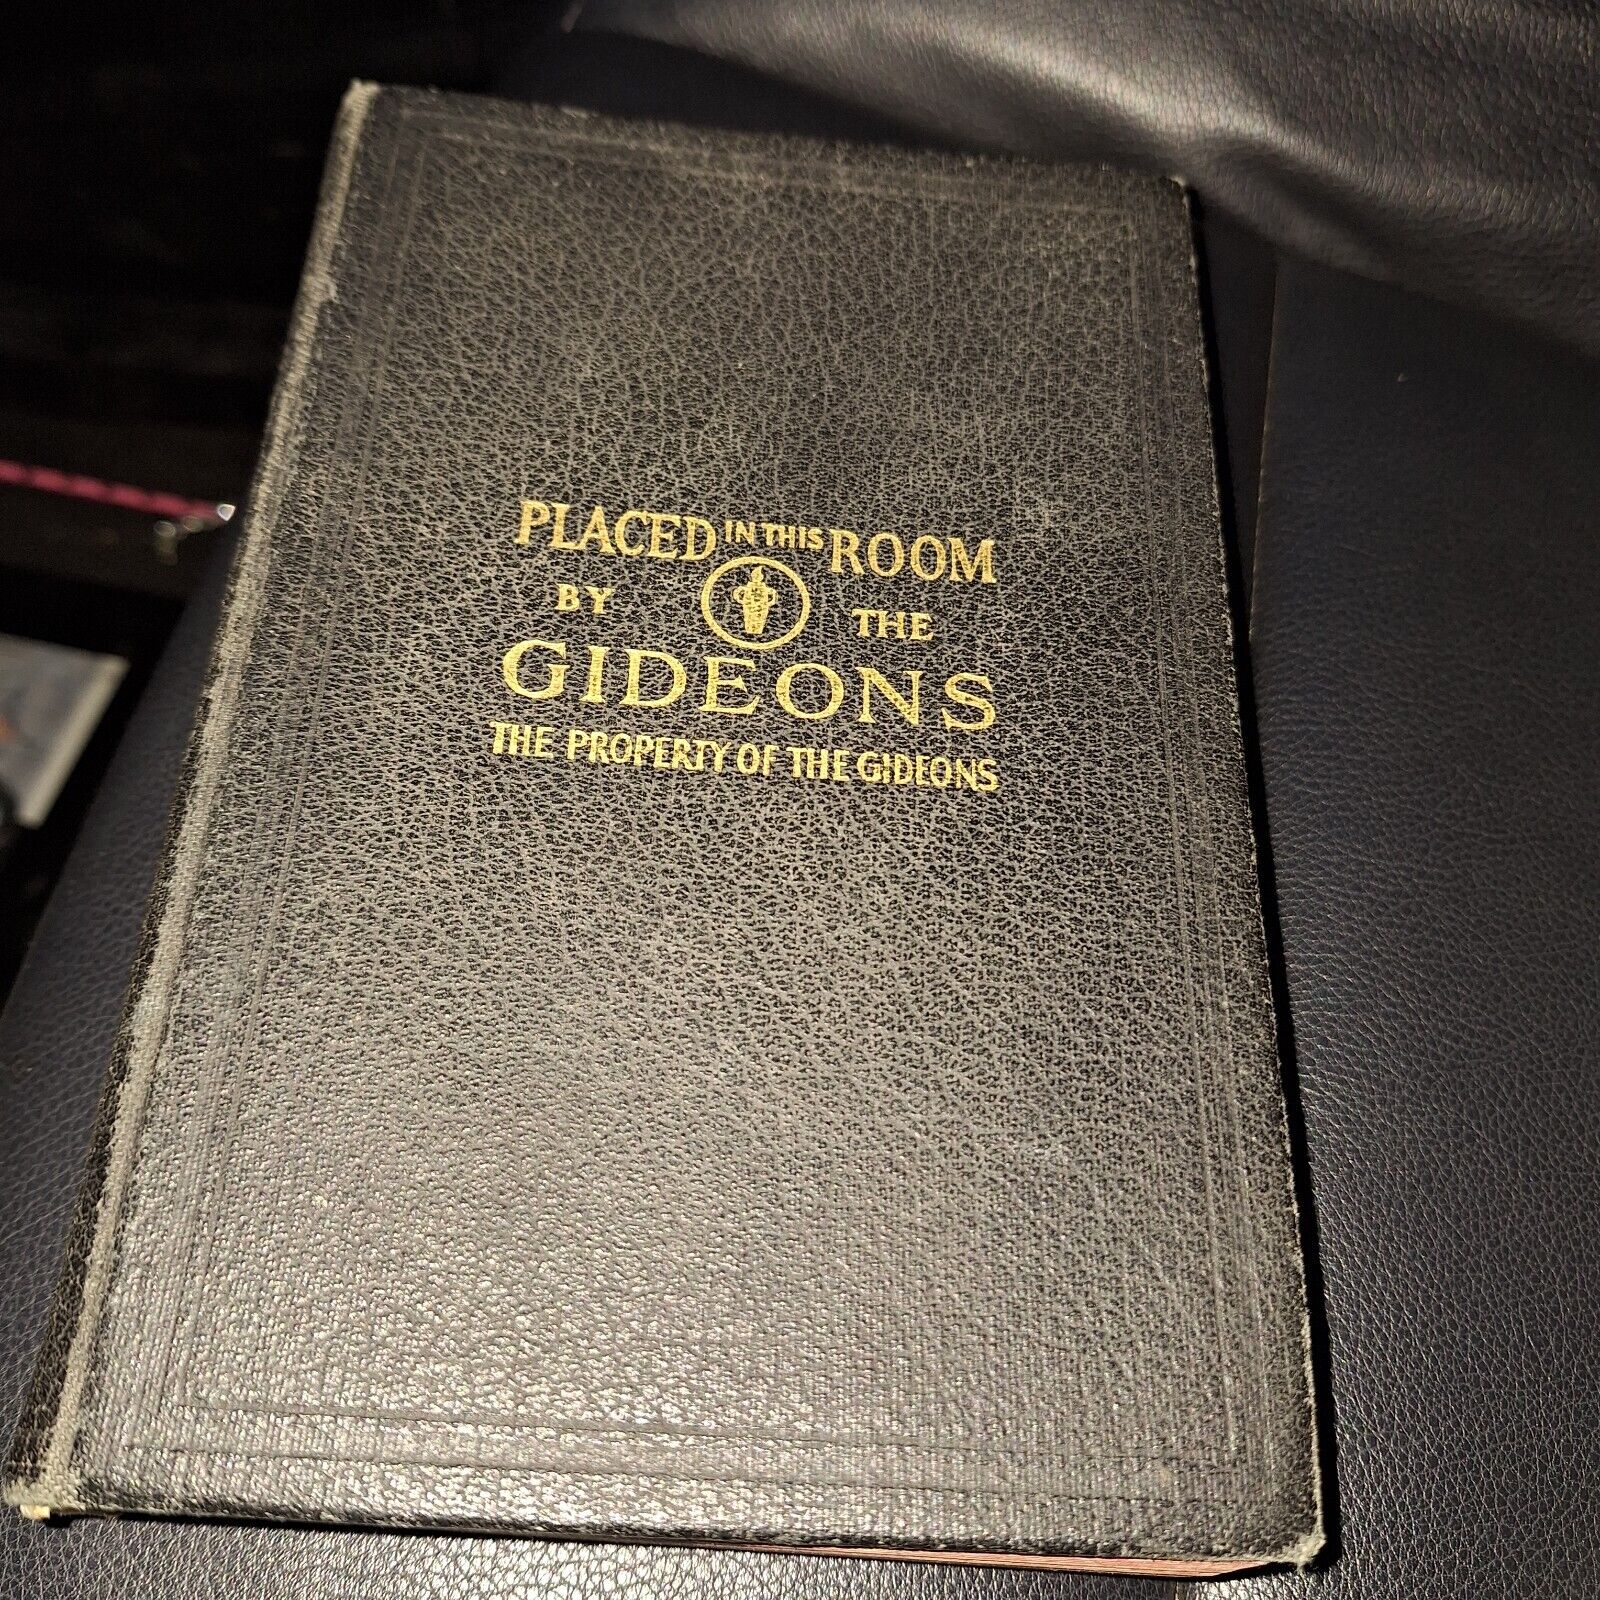 Vintage Holy Bible Placed In The Room By The Gideons (Self Pronouncing)